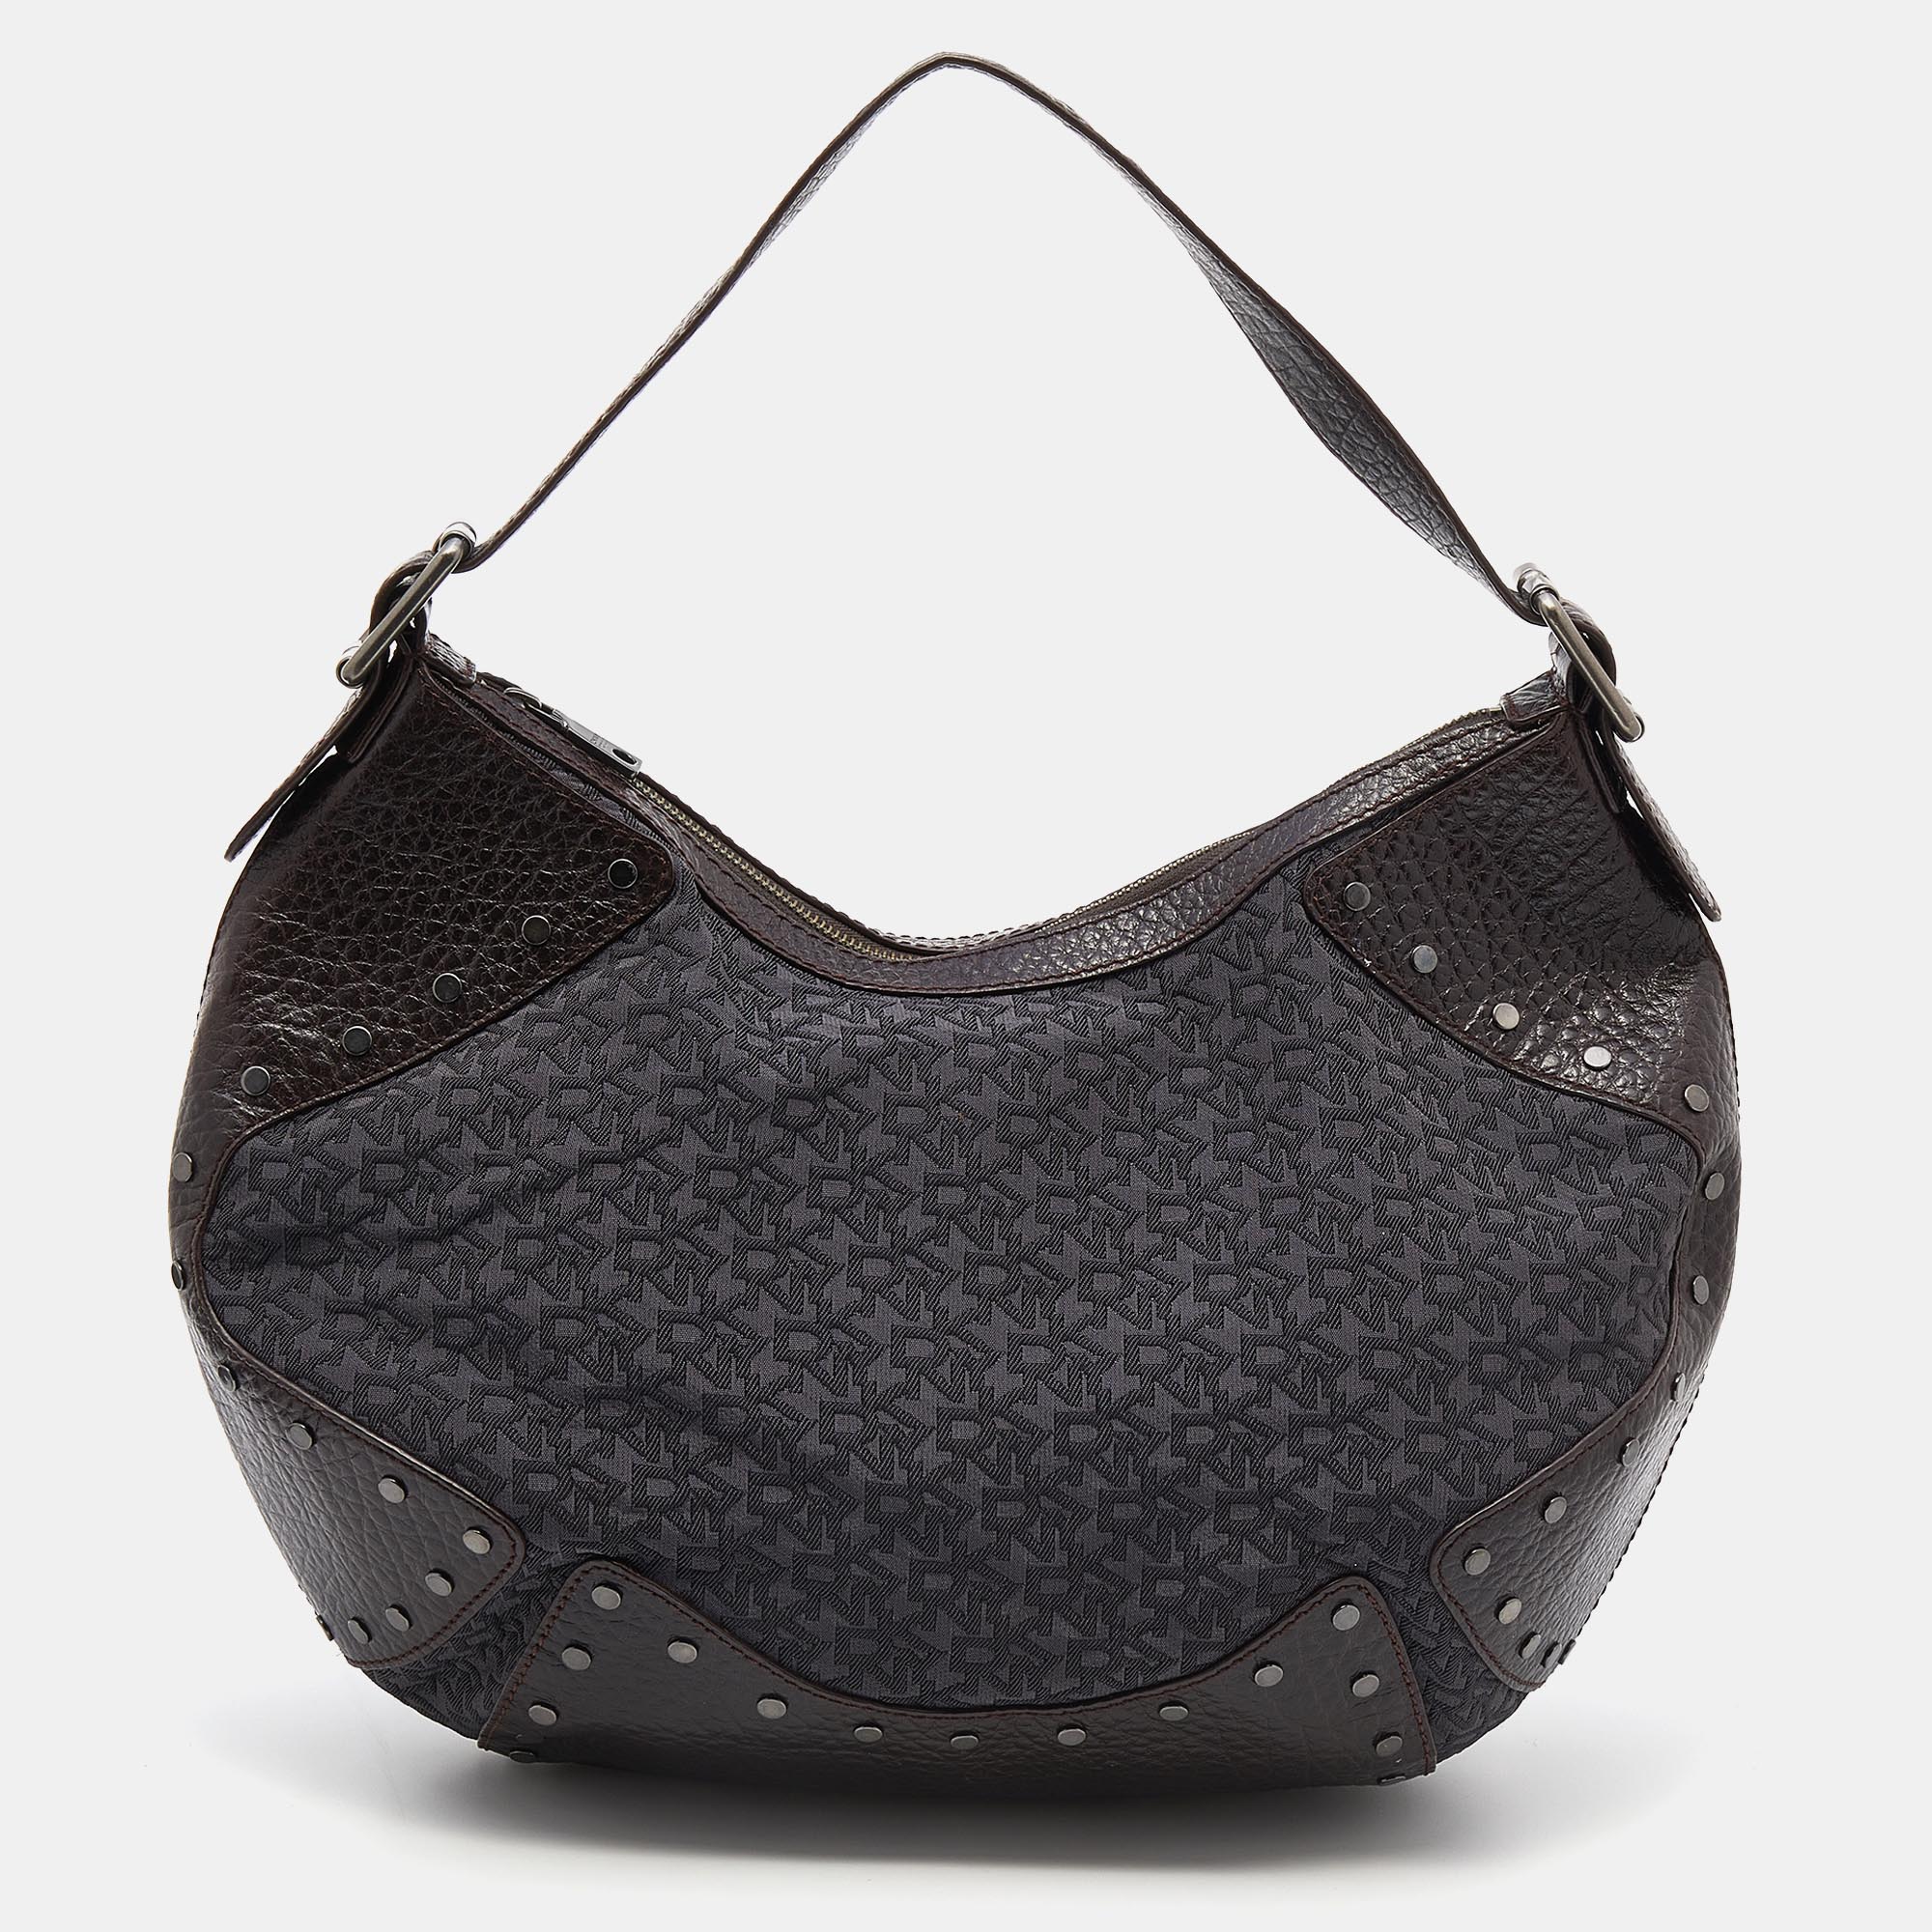 Dkny Brown/Grey Leather And Canvas Studded Hobo